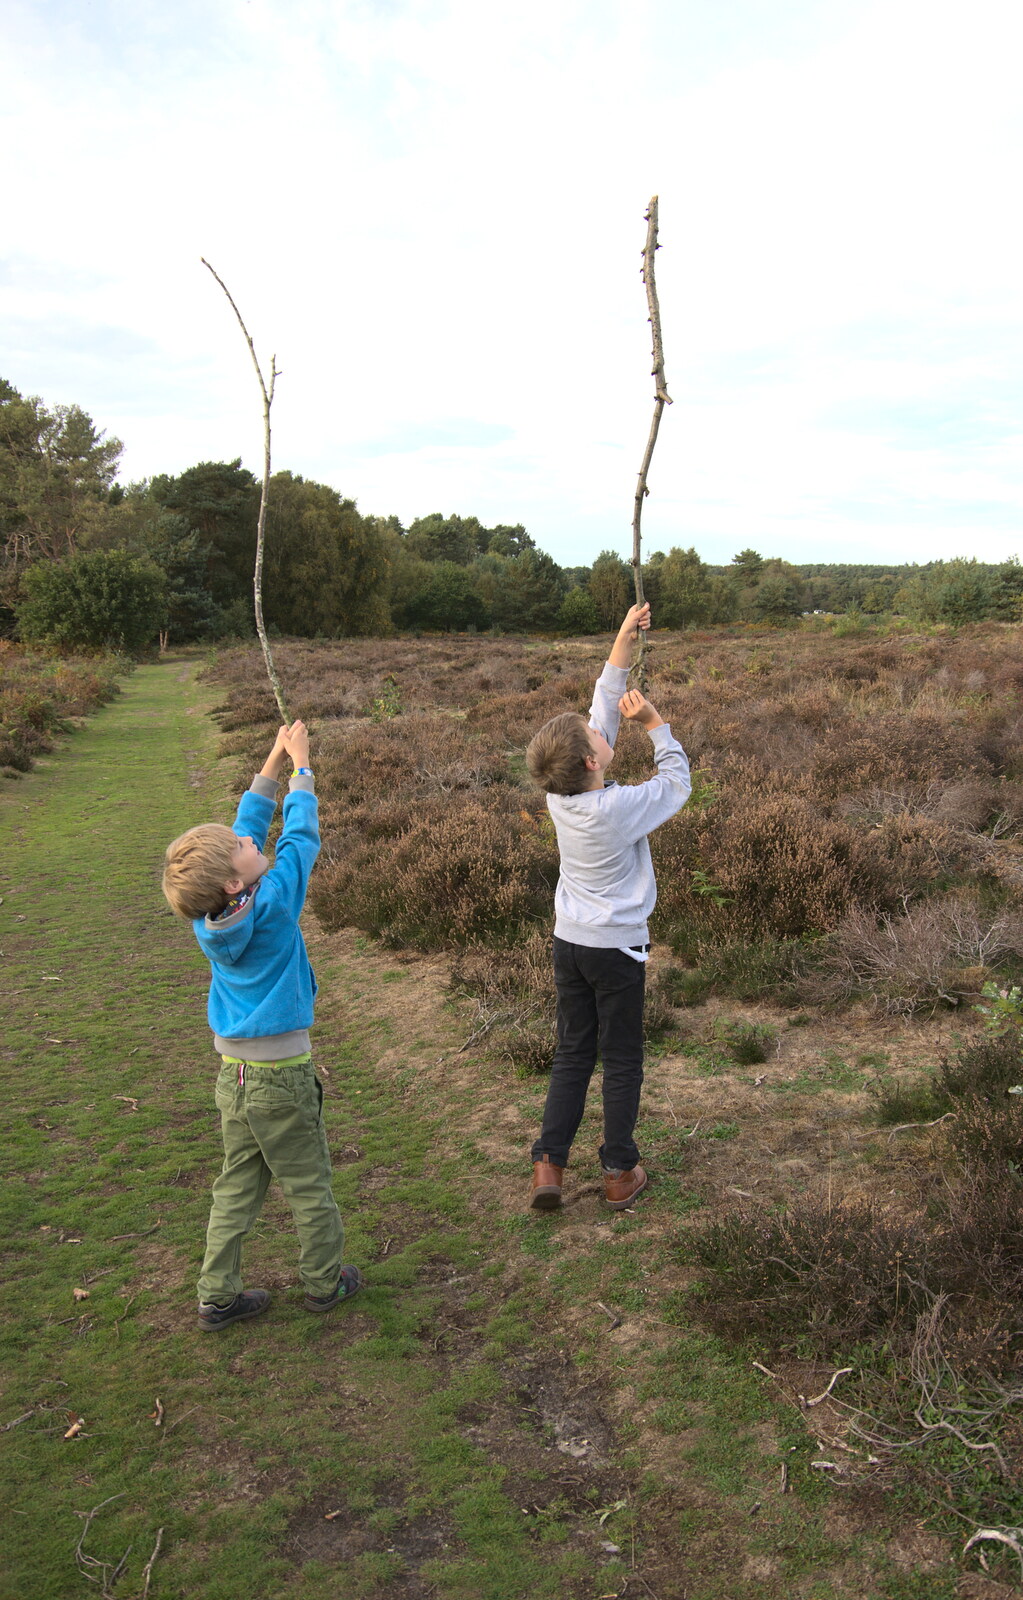 Both the boys have sticks from Evidence of Autumn: Geocaching on Knettishall Heath, Suffolk - 7th October 2018